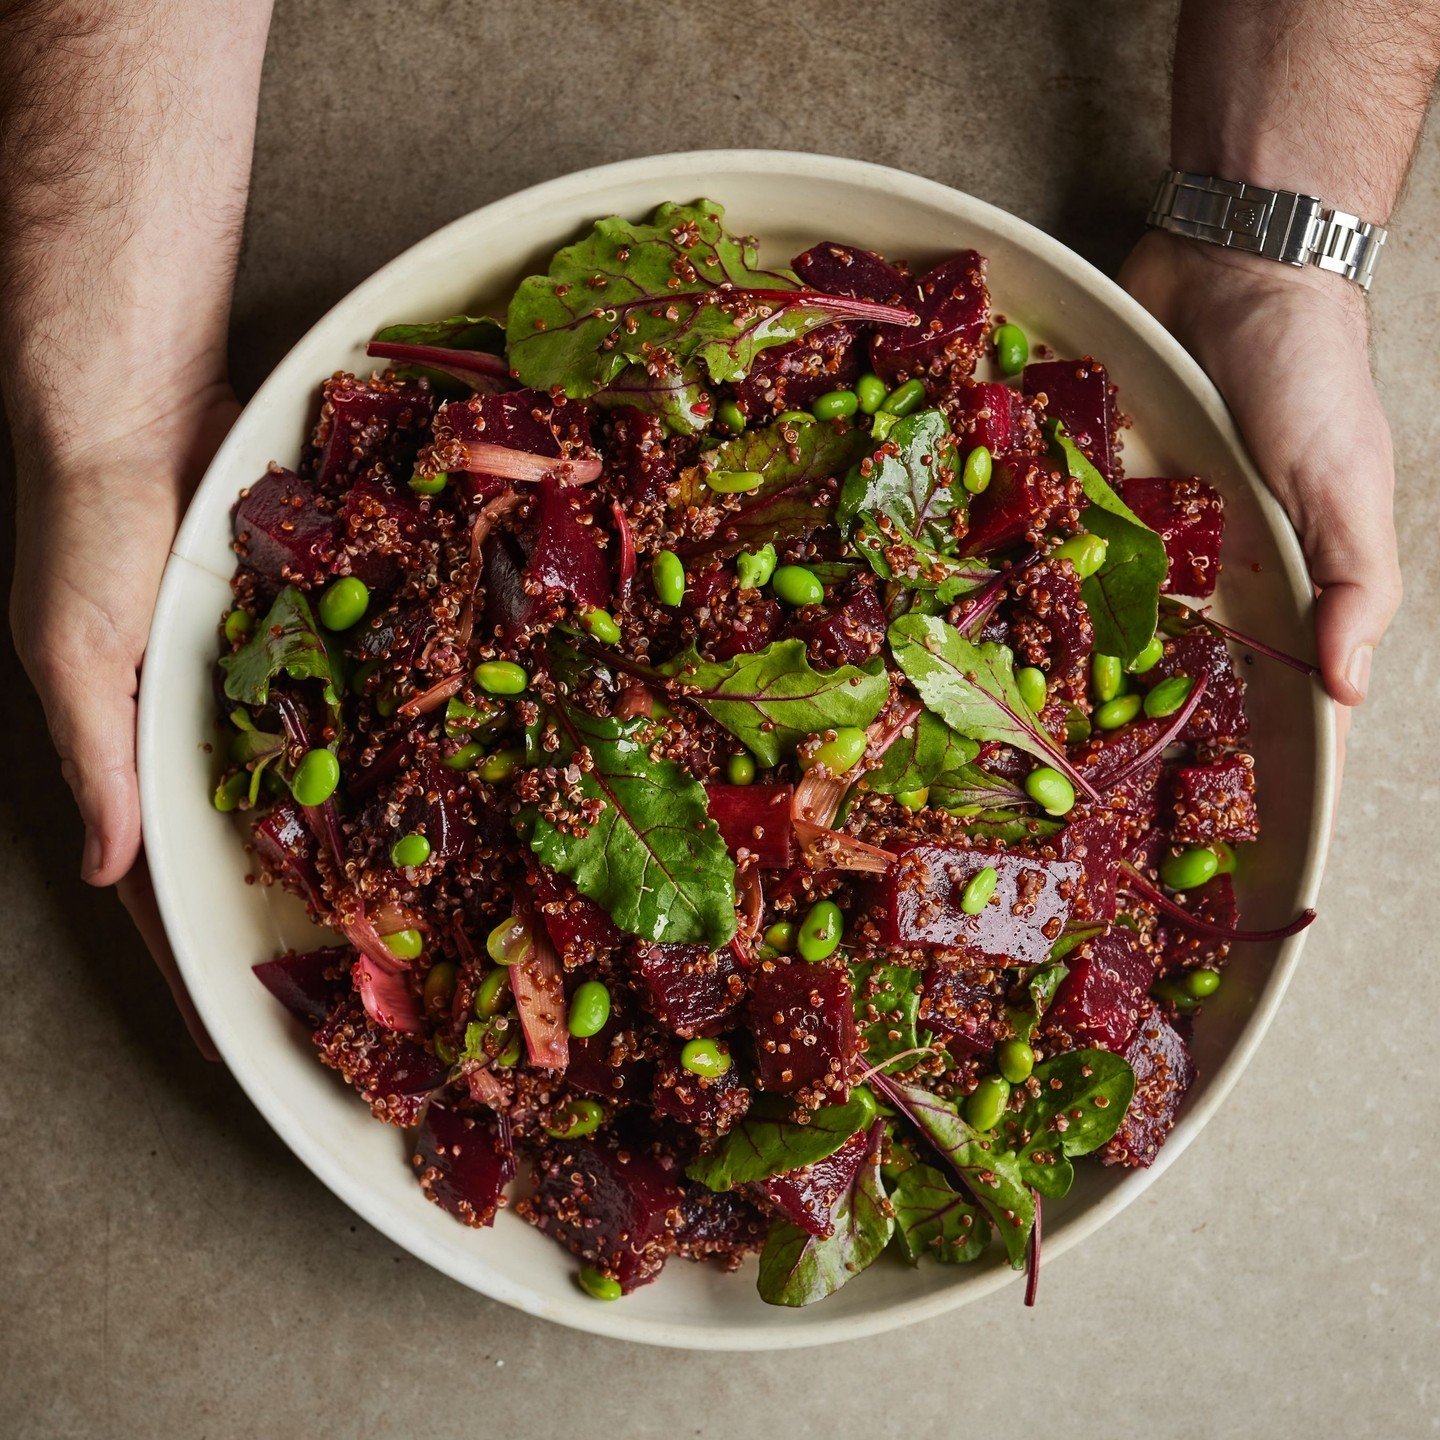 Beetroot, edamame quinoa, cured rhubarb, baby chard leaves, ponzu salad. It's not only vegan, gluten-free, and dairy-free but also bursting with vibrant colours and bold flavours. 

Order now for pick-up or Sydney CBD delivery only at kitchenbymike.c